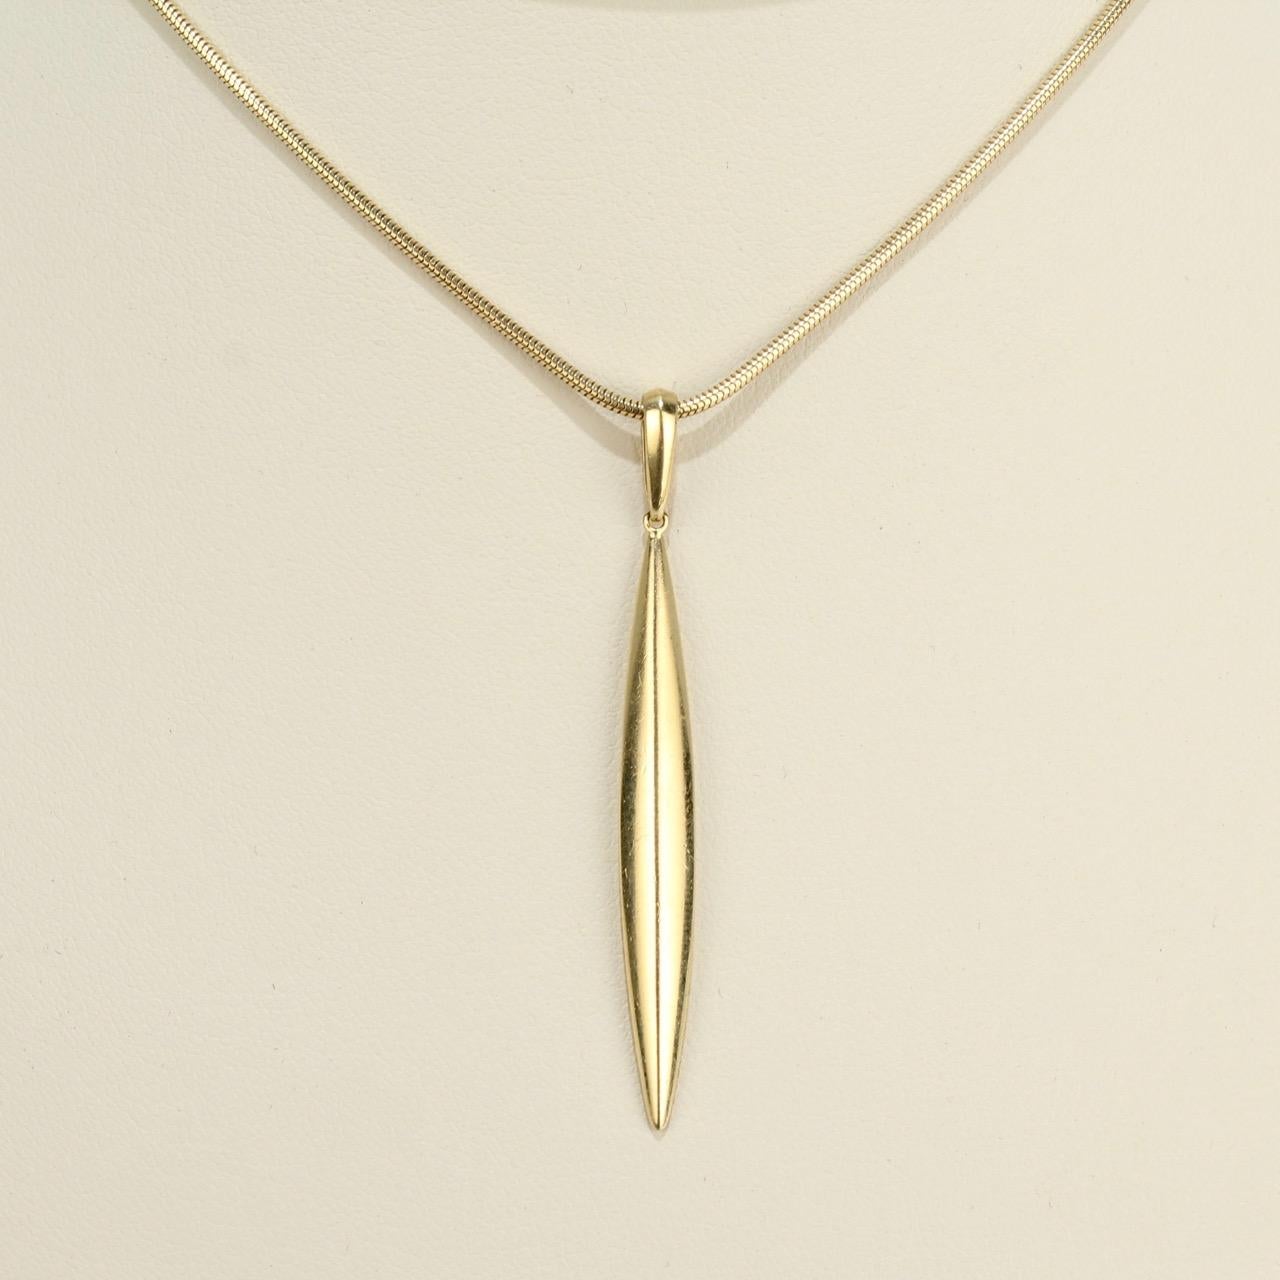 Modern Tiffany & Co. 18 Karat Gold Feather Pendant and Snake Chain Necklace